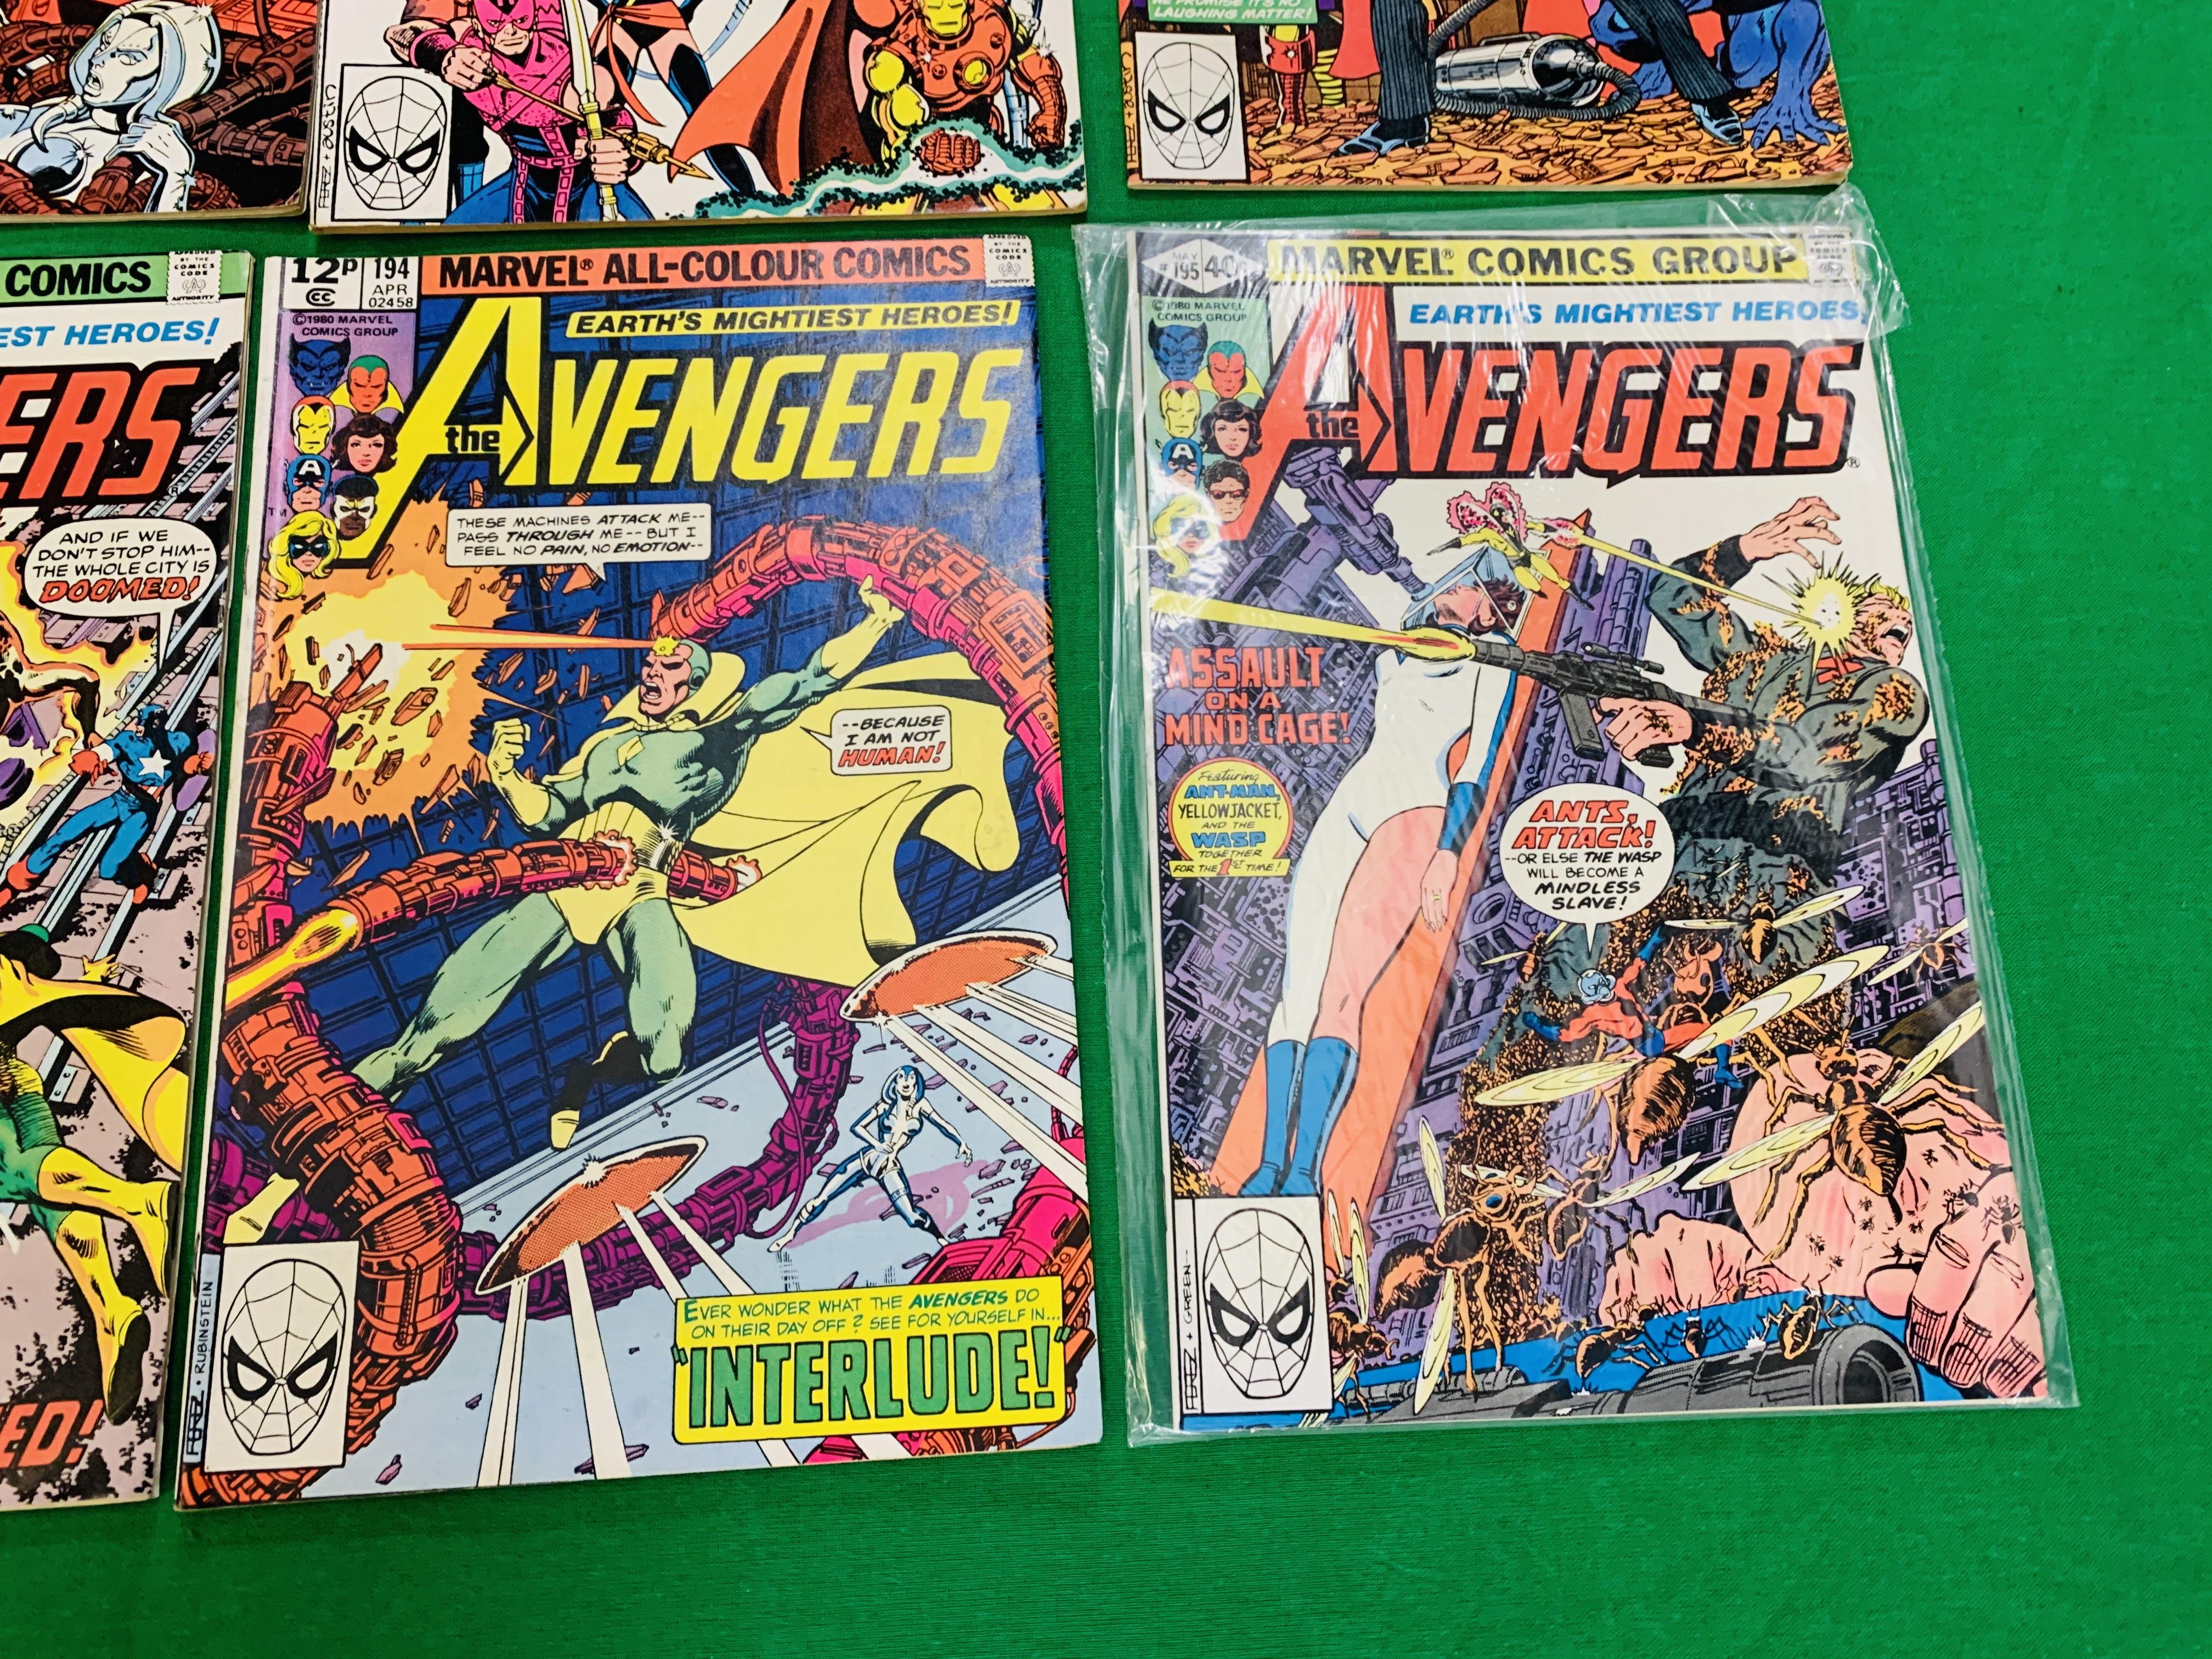 MARVEL COMICS THE AVENGERS NO. 101 - 299, MISSING ISSUES 103 AND 110. - Image 70 of 130